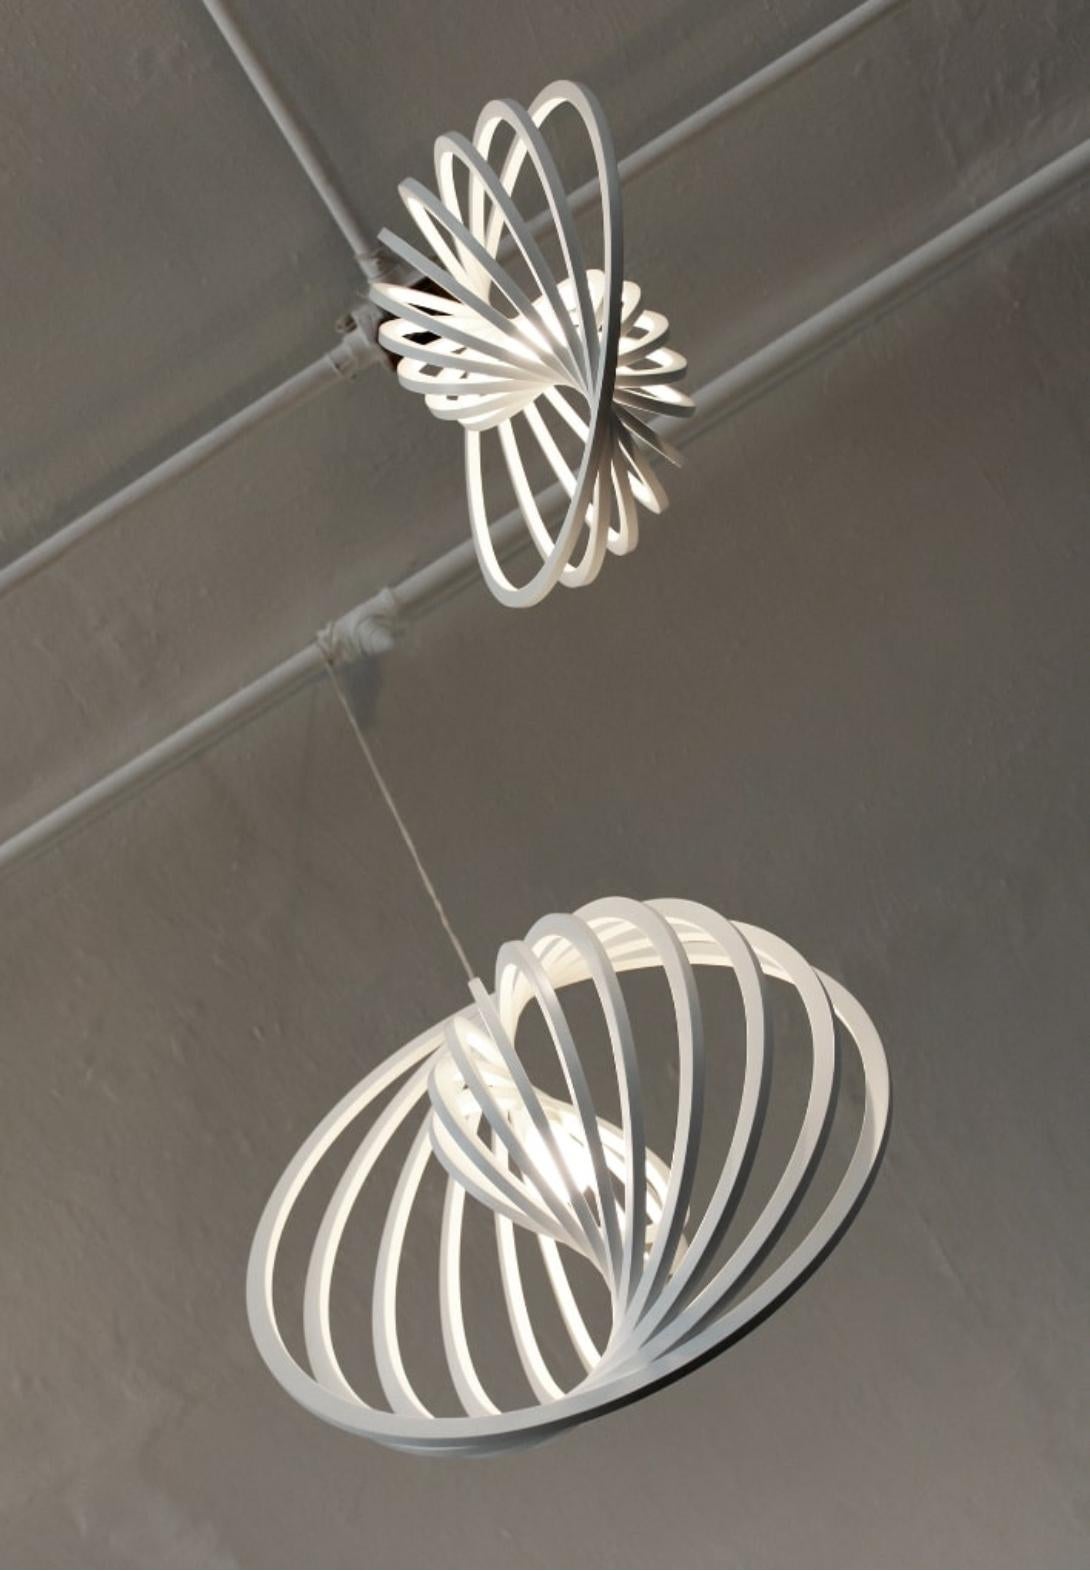 Engiro Ceiling Light, Maria Beckmann, Represented by Tuleste Factory 3